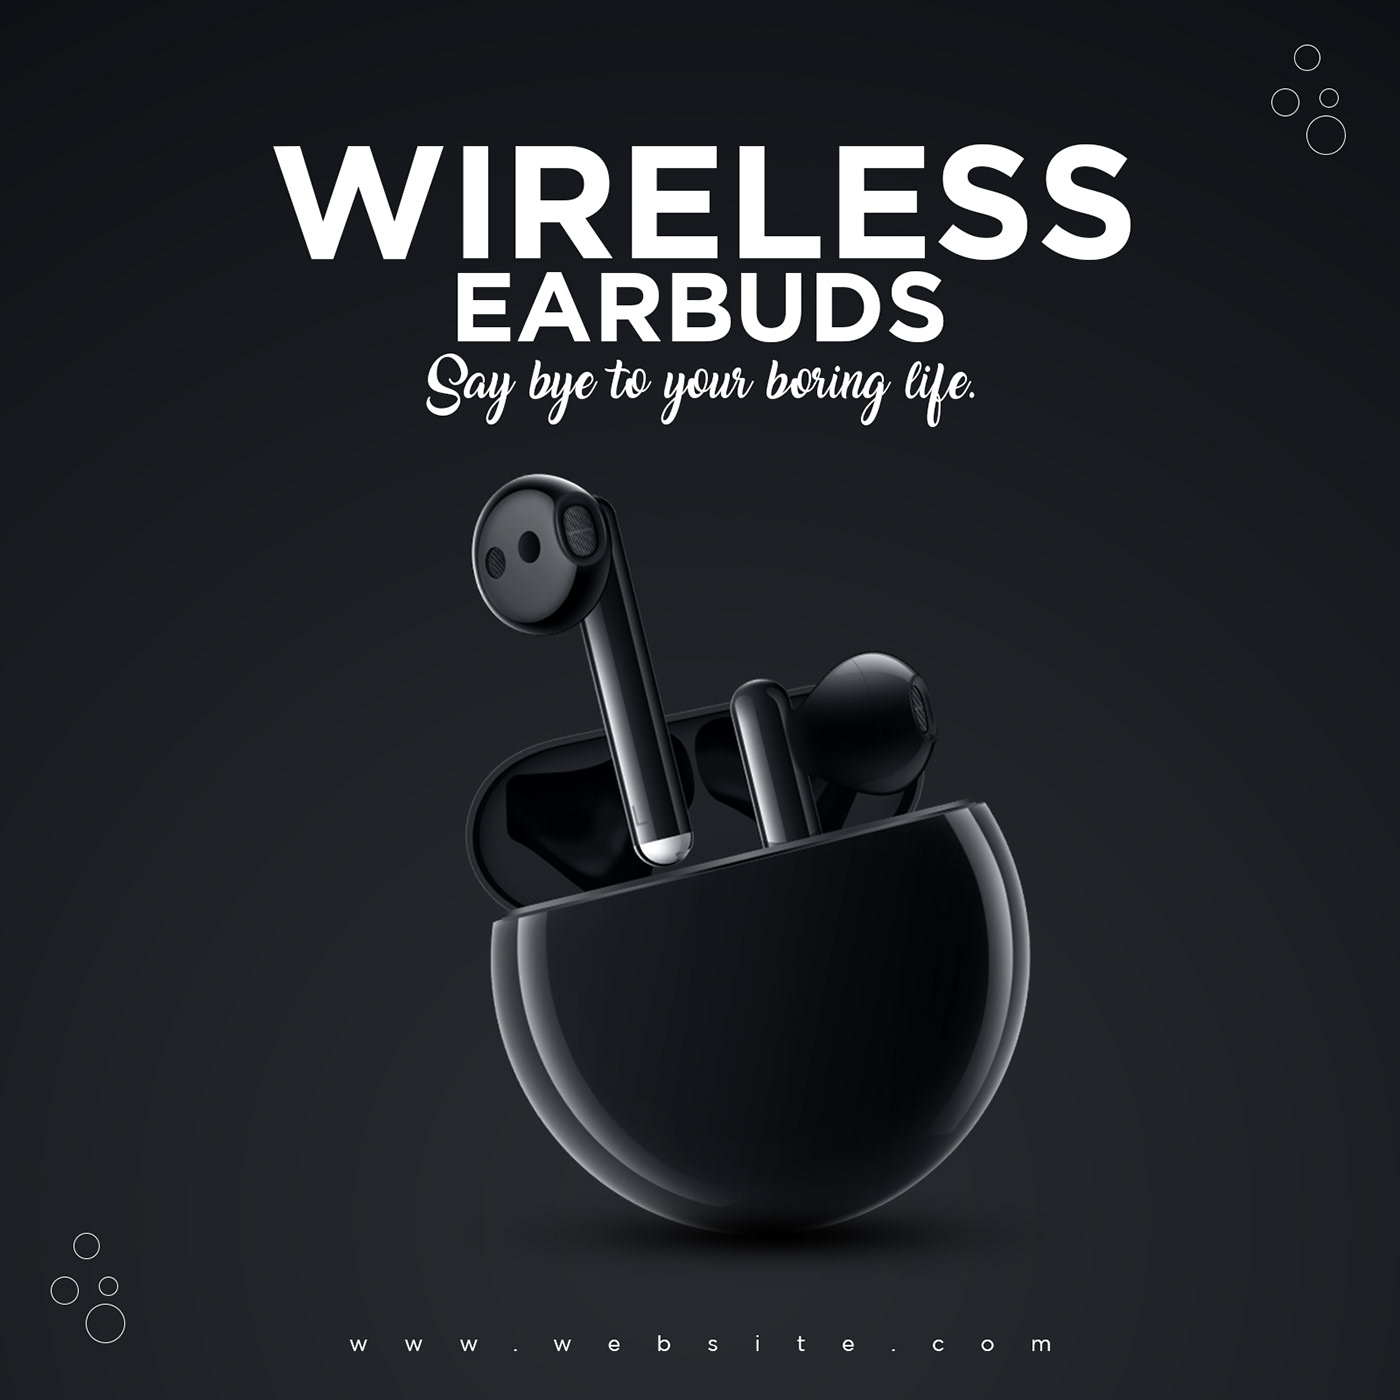 ads,
Advertising,
earbuds,
Product banner,
banner design,
product web banner,
earbuds banenr,
Web Ba